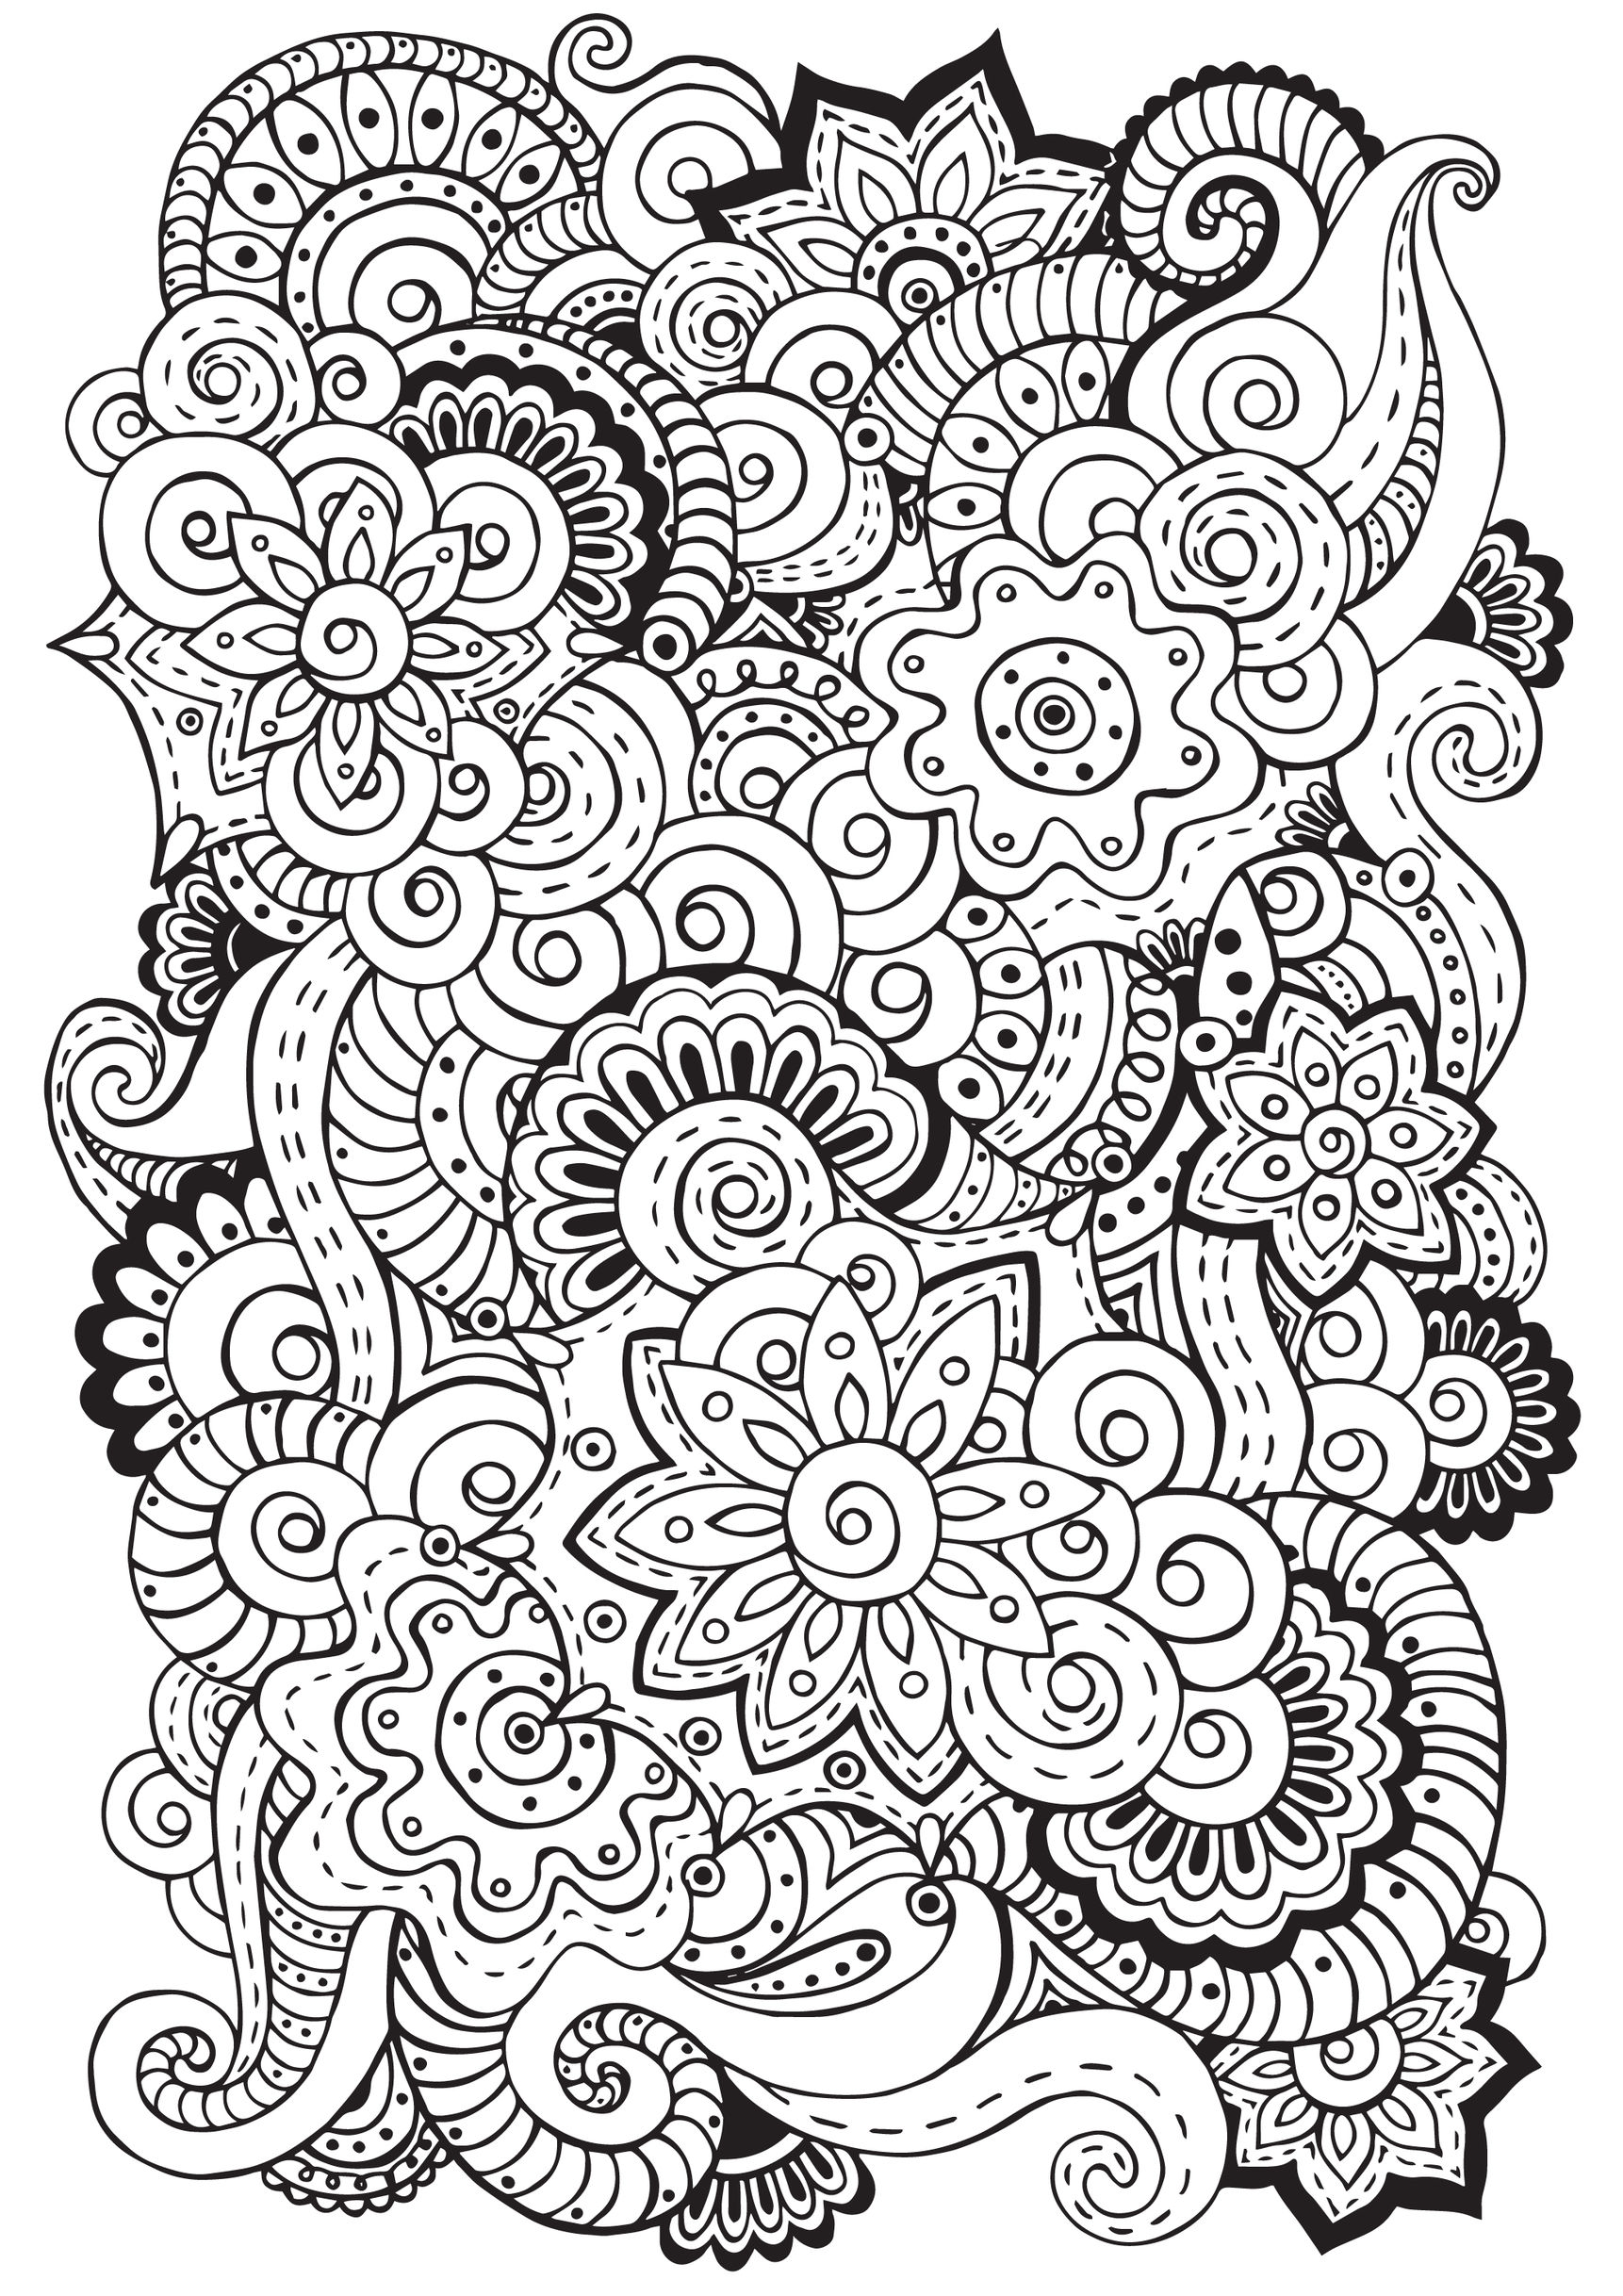 Mandala Coloring Book for Adults: Mindfulness Coloring Book For